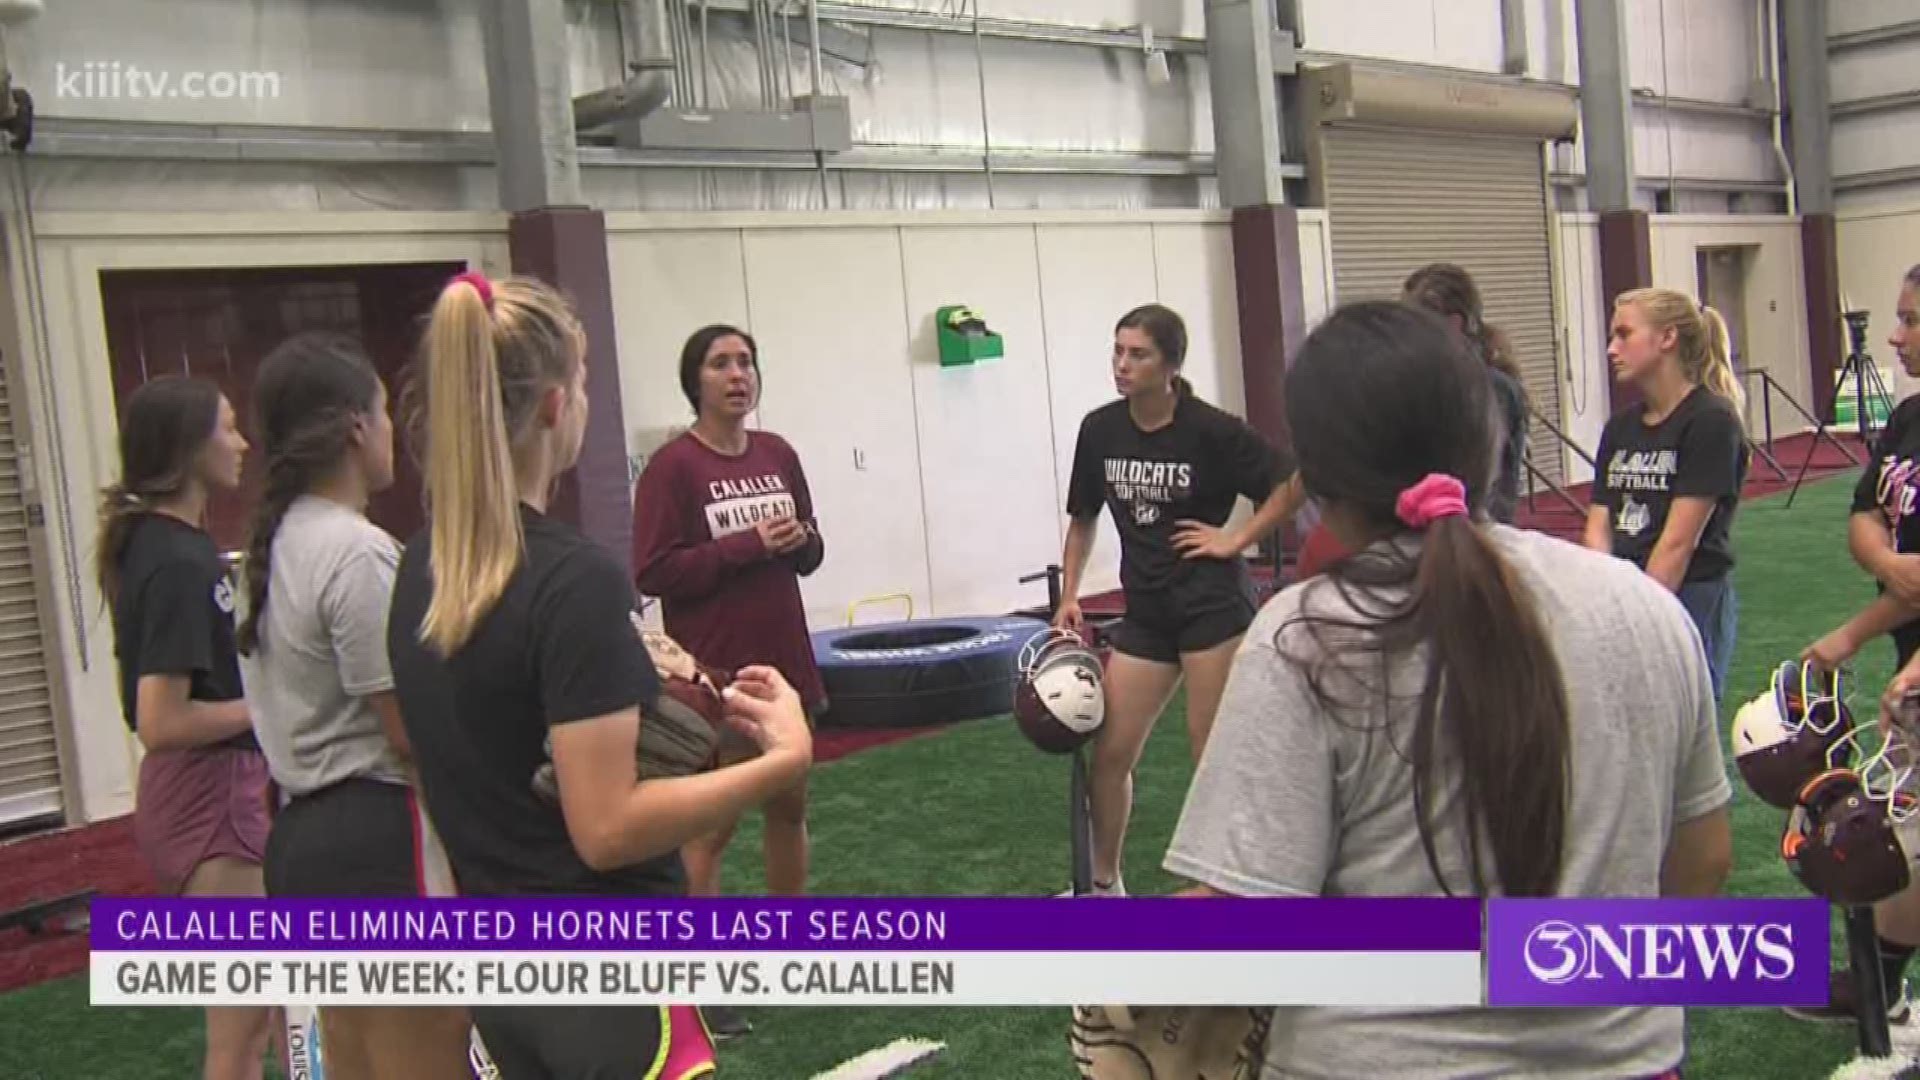 The Calallen softball team eliminated Flour Bluff in the third round last season, but lost out to the Hornets for the district championship this year.